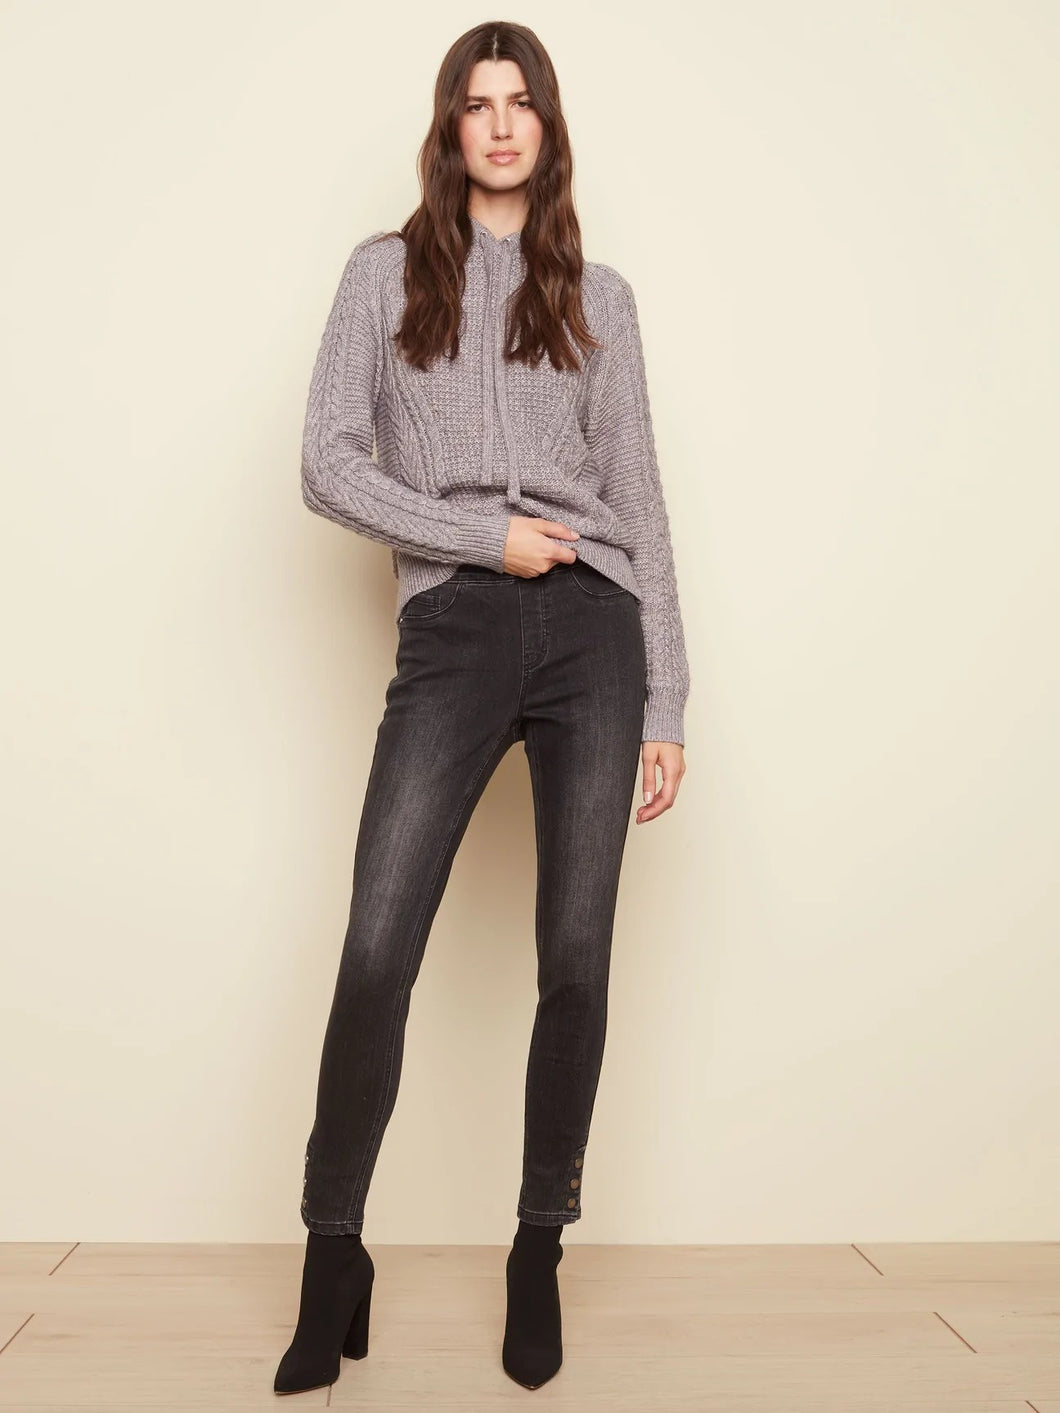 Grey Wash Jeans with Snaps at Hem